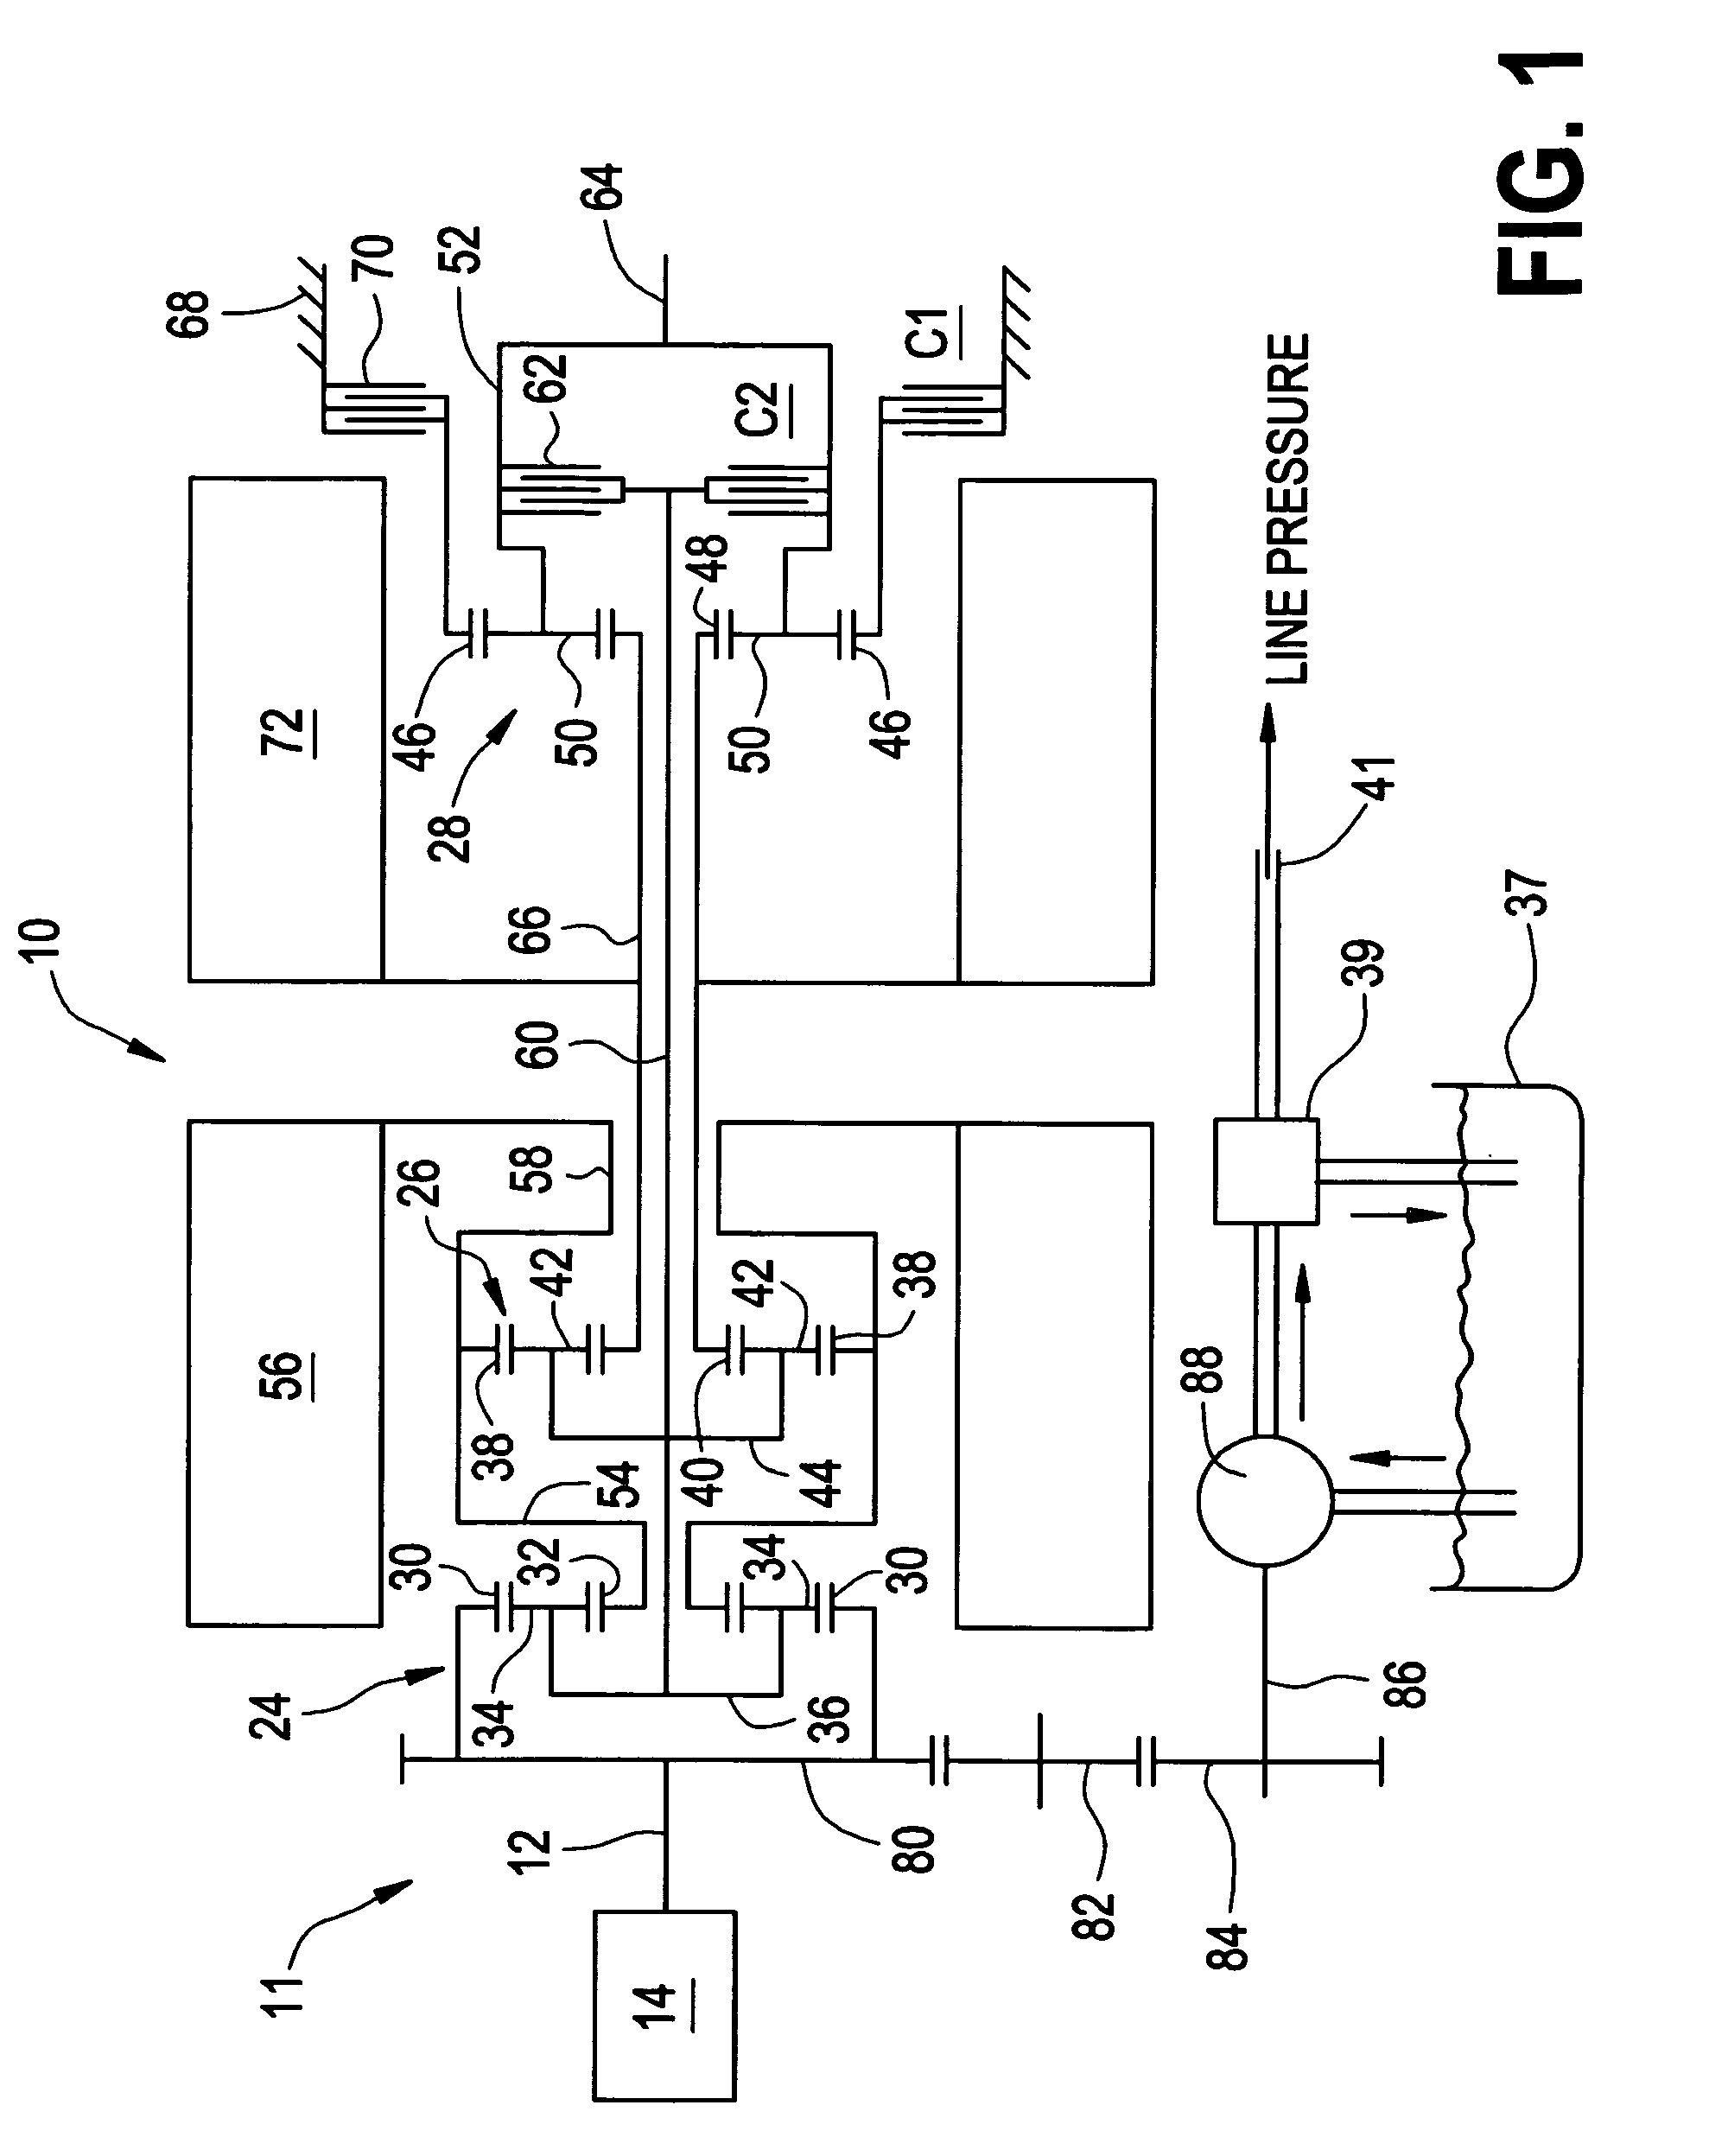 Method of testing motor torque integrity in a hybrid electric vehicle